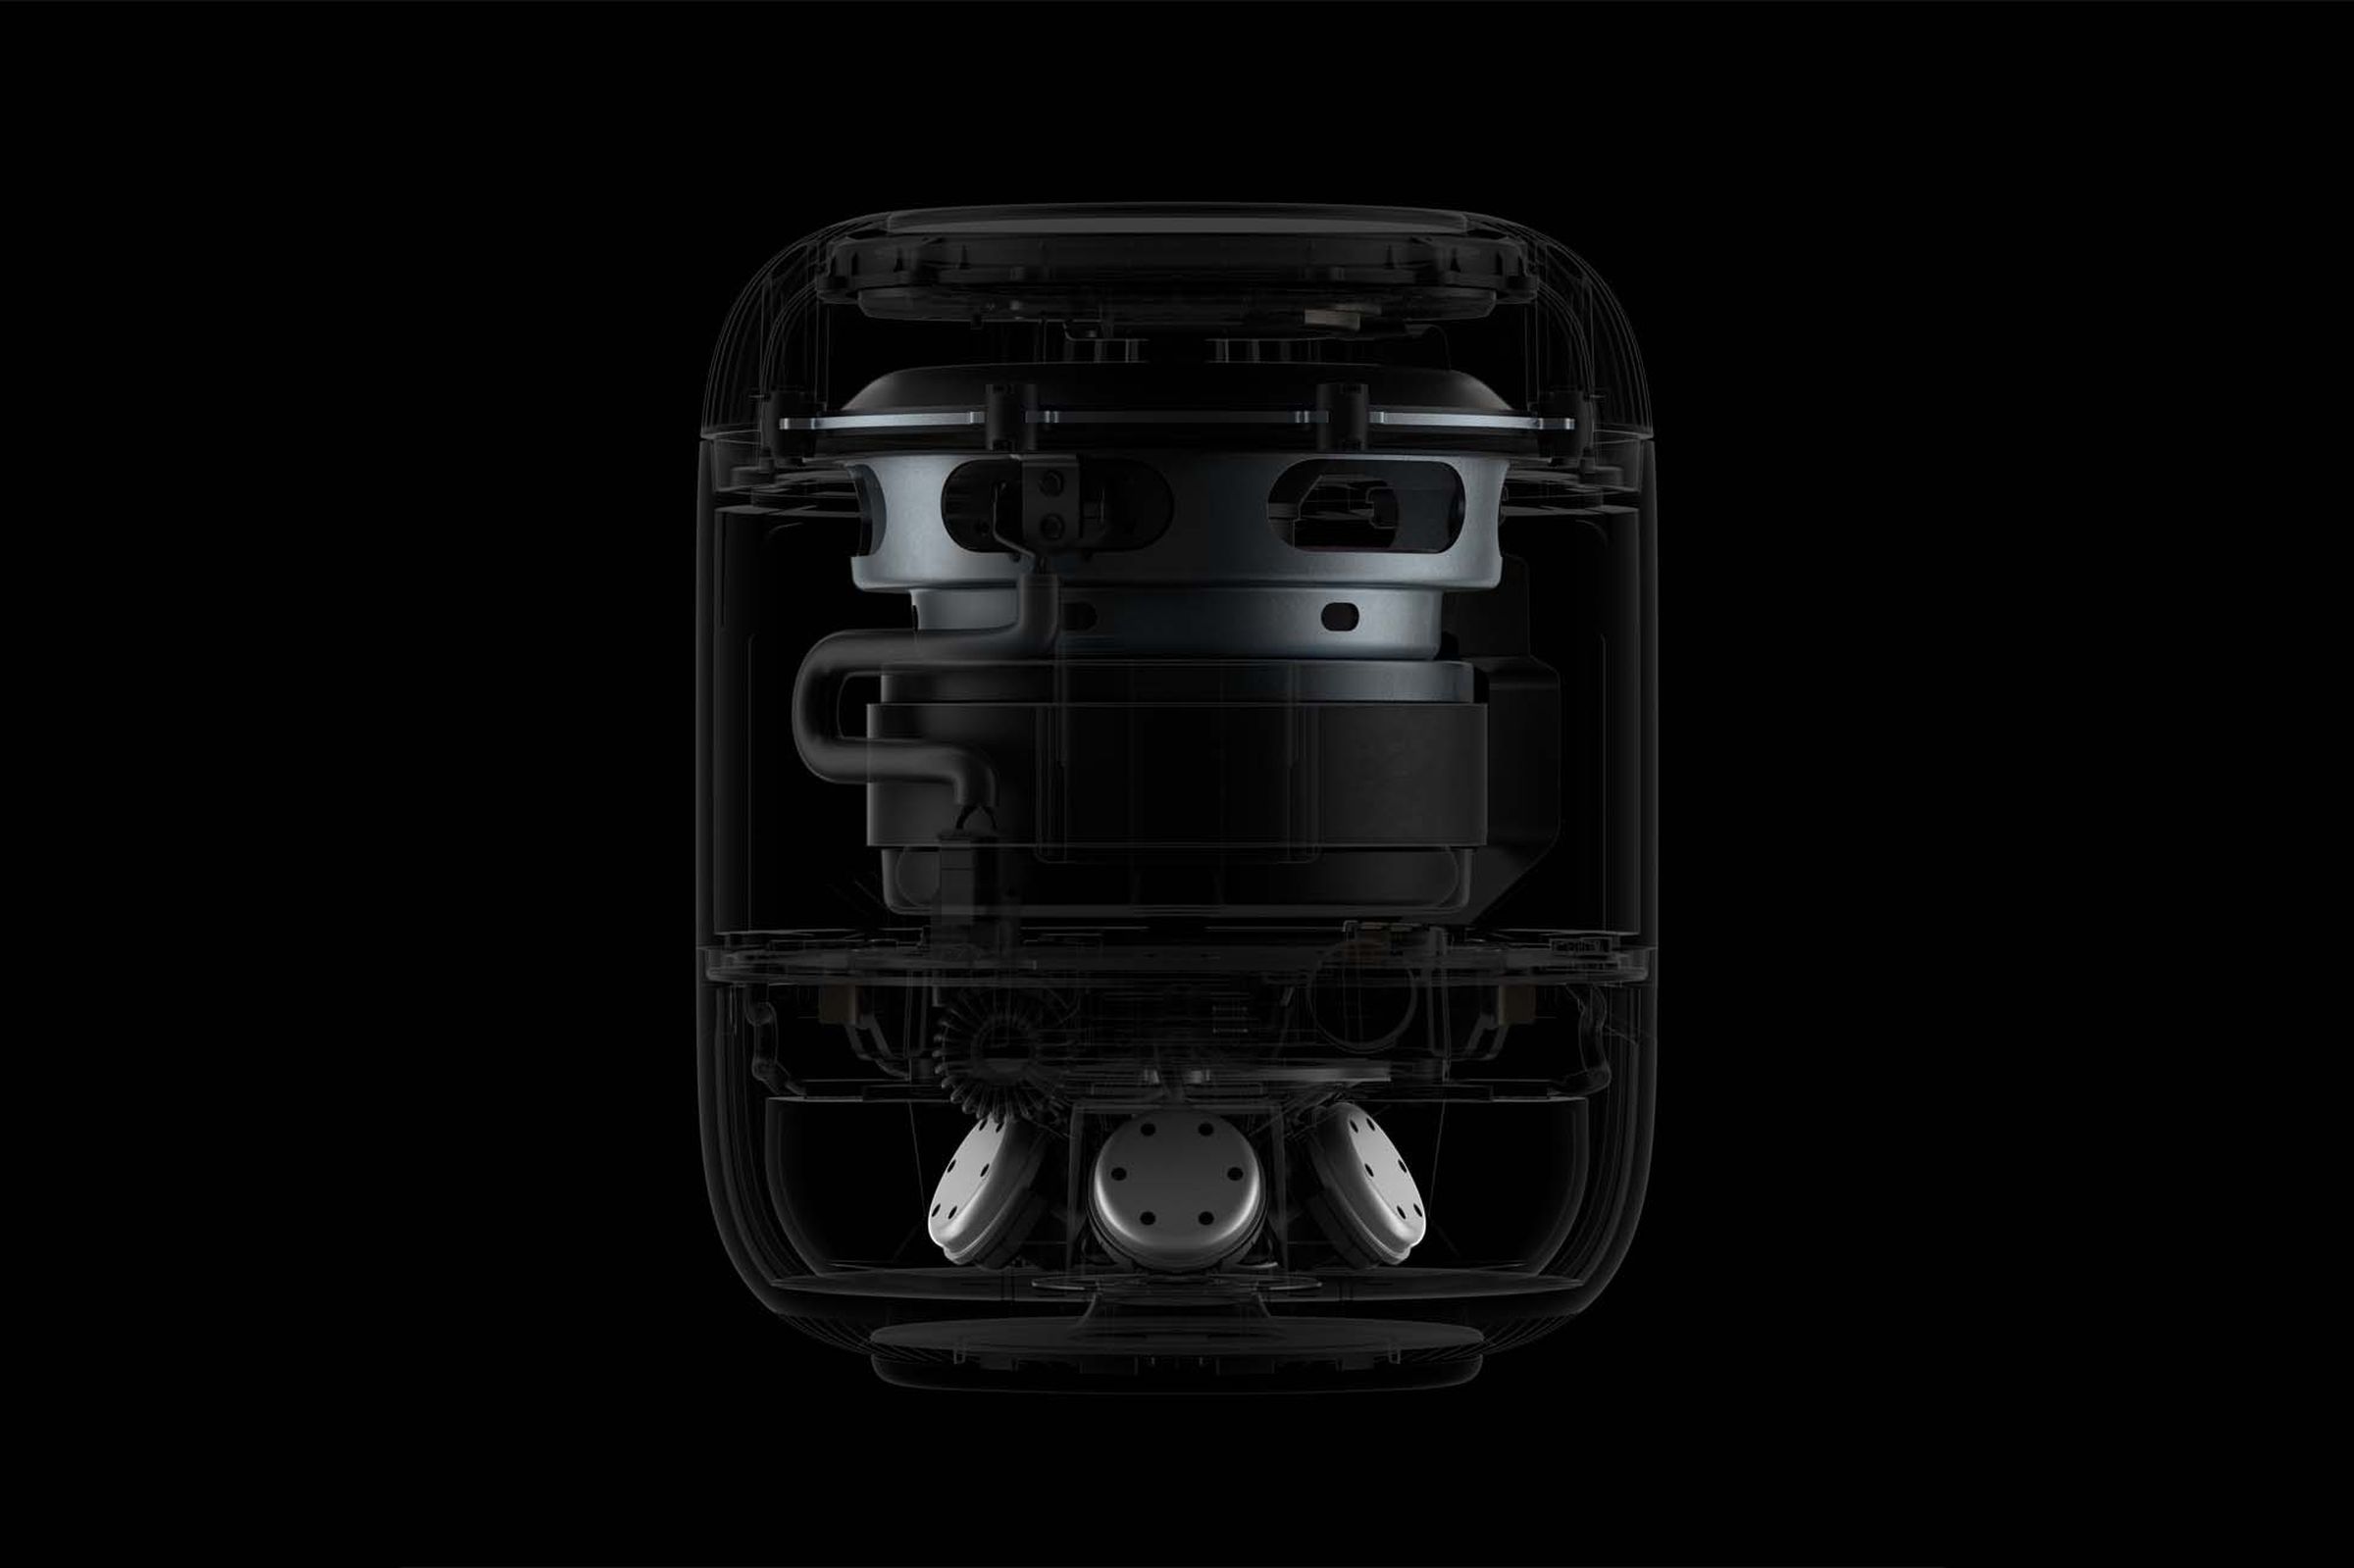 Cross-section of new HomePod.